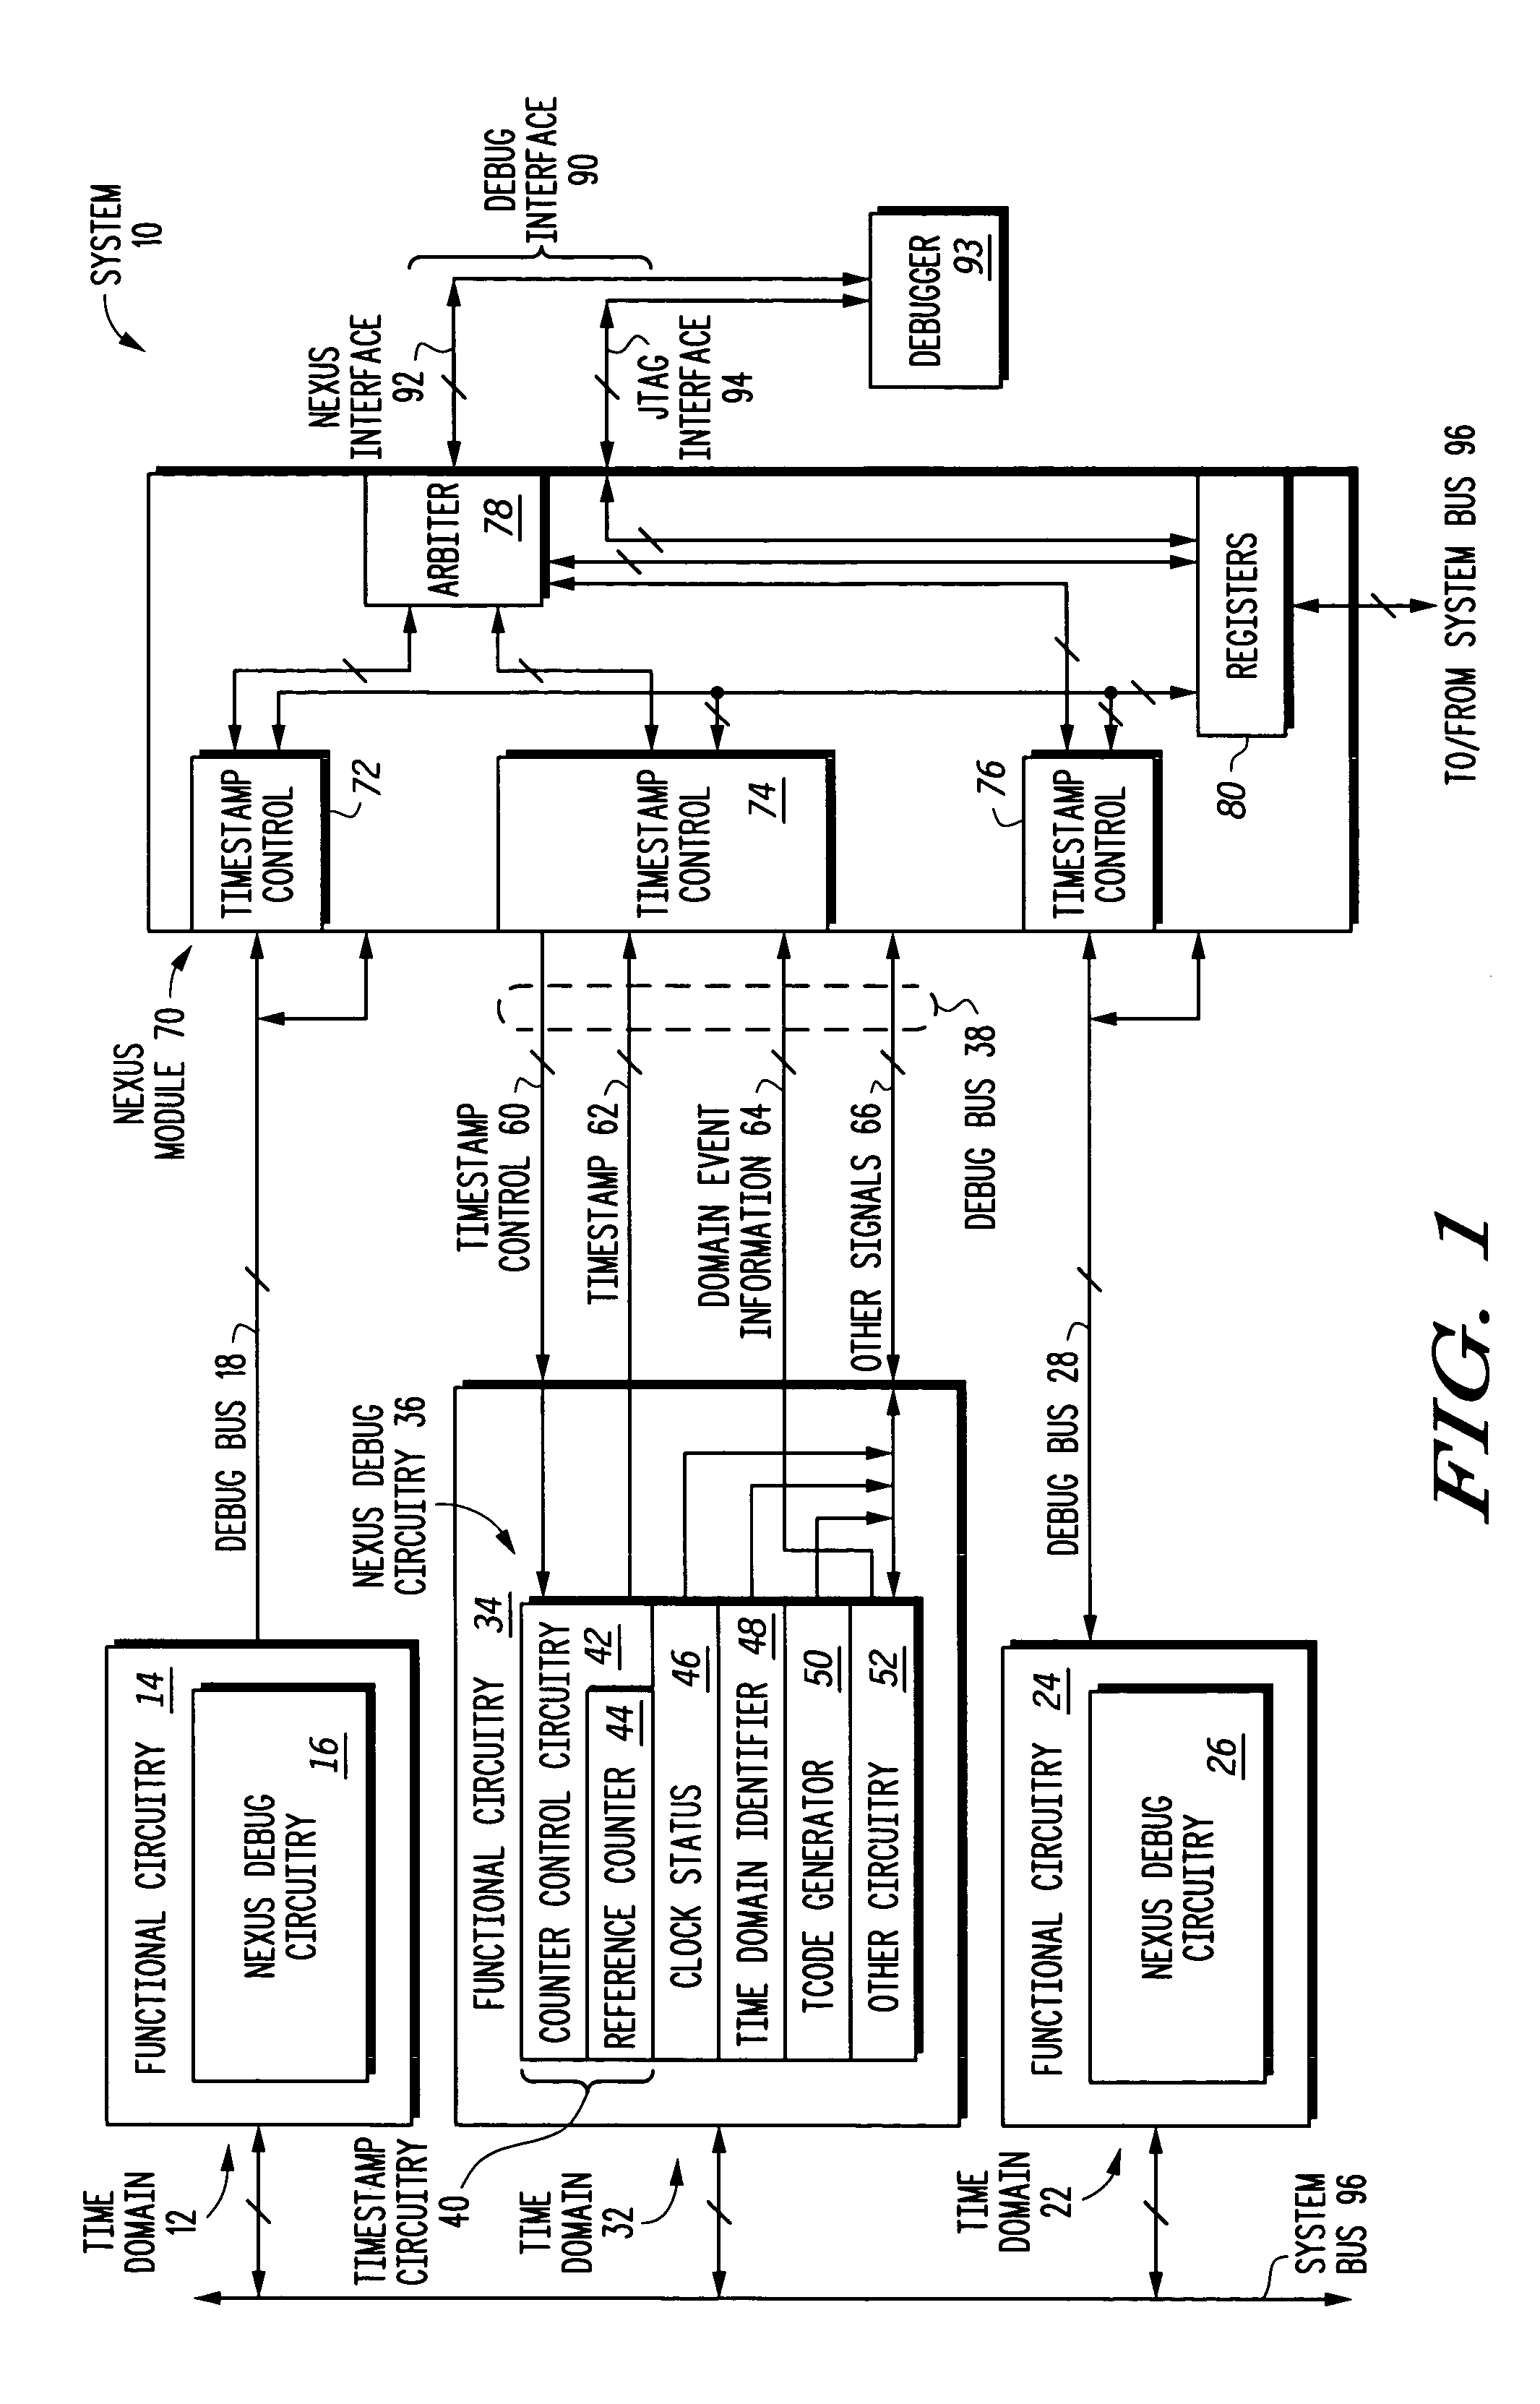 Apparatus and method for time ordering events in a system having multiple time domains